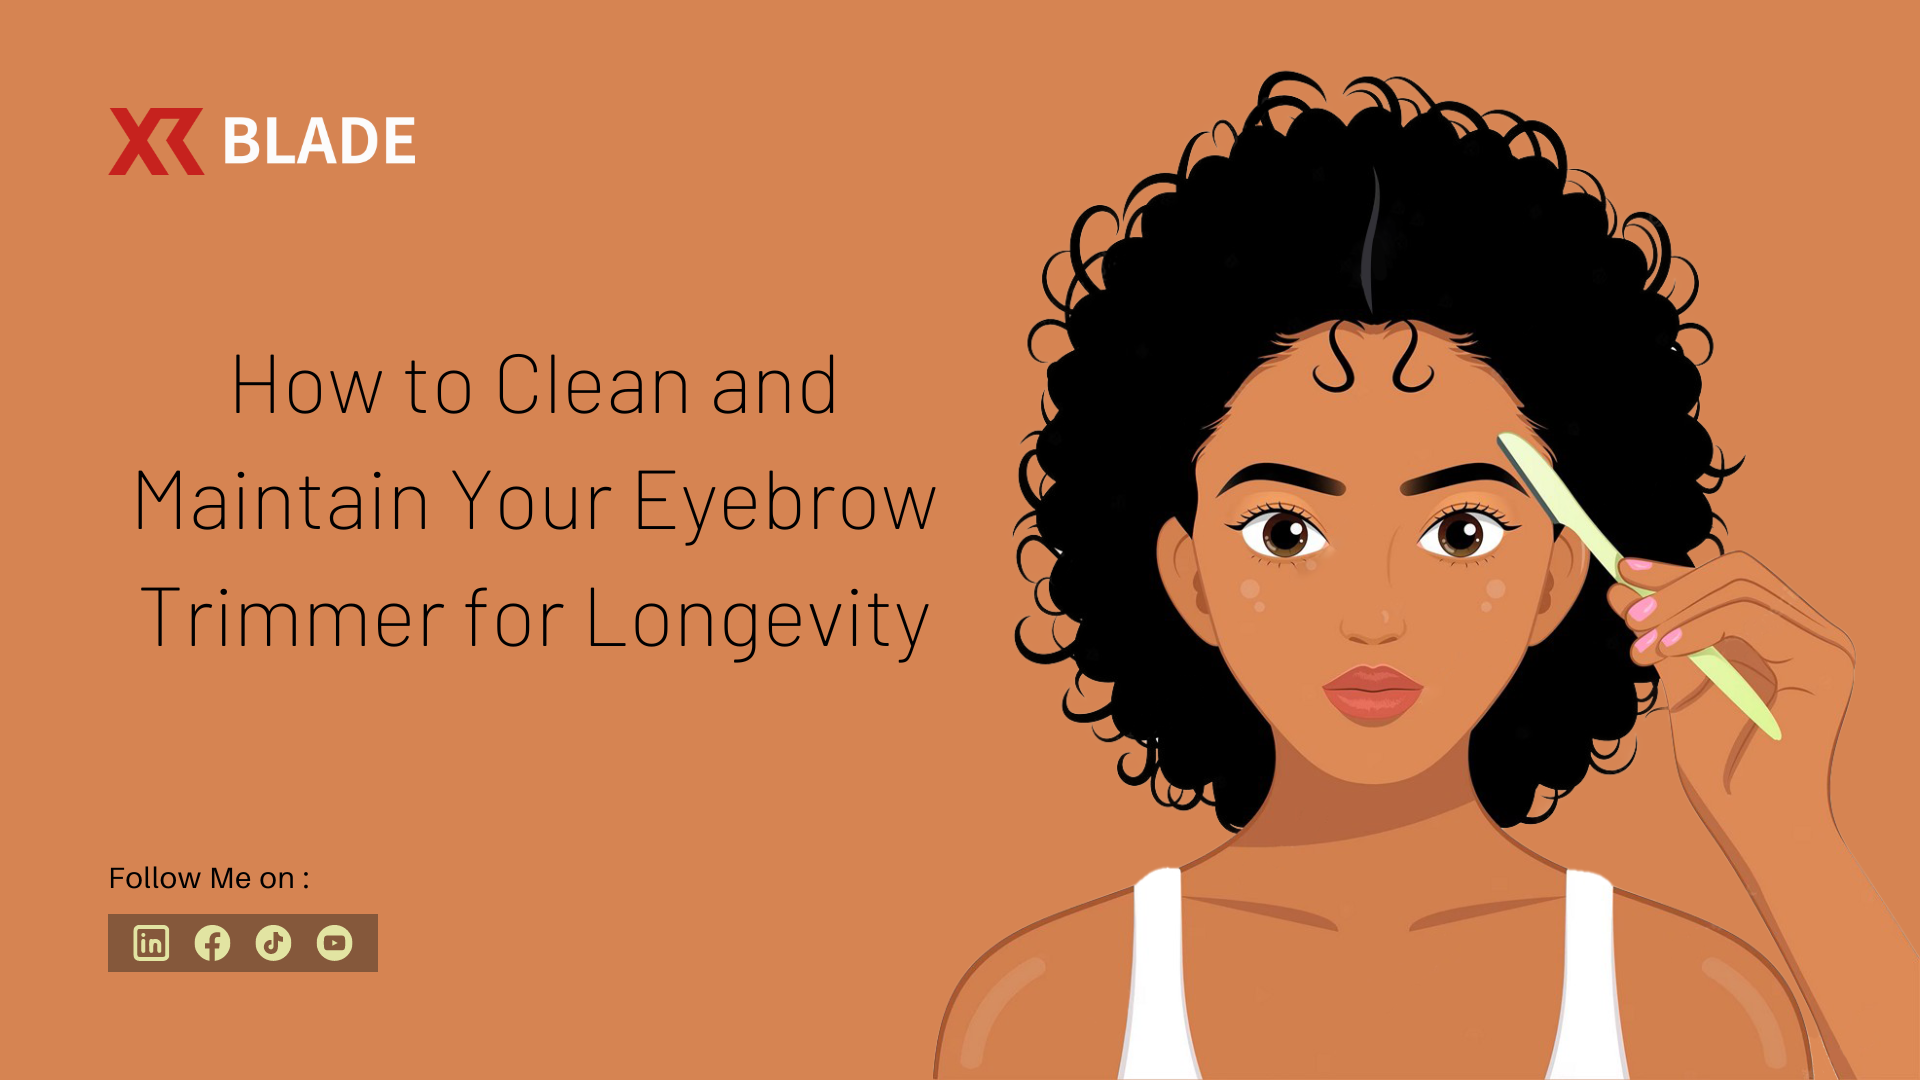 How to Clean and Maintain Your Eyebrow Trimmer for Longevity